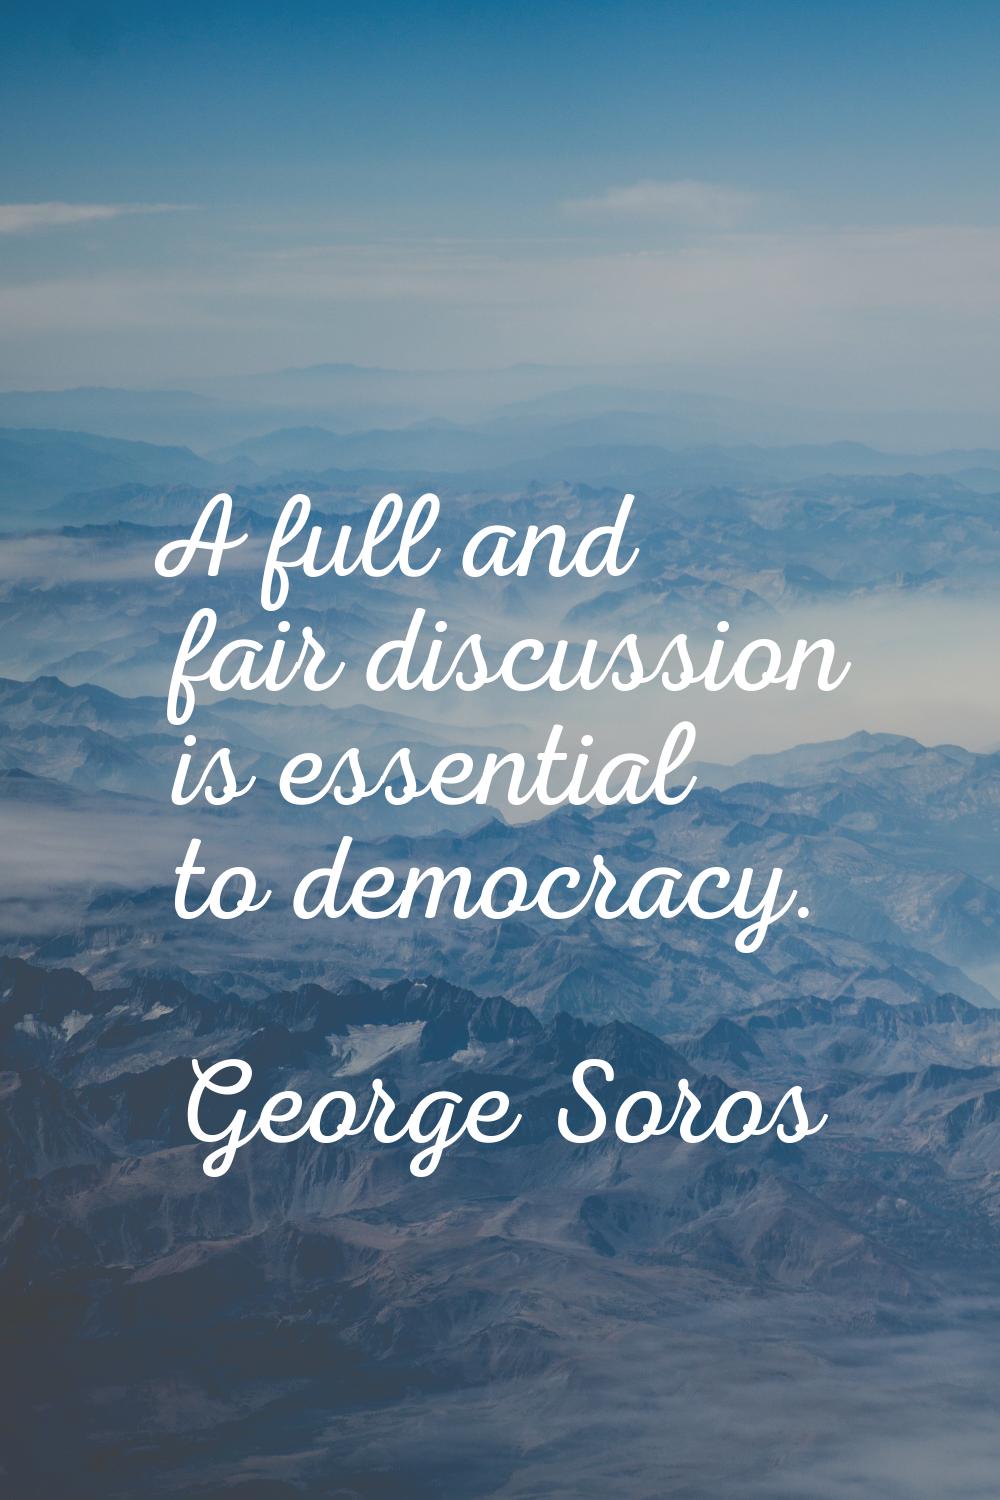 A full and fair discussion is essential to democracy.